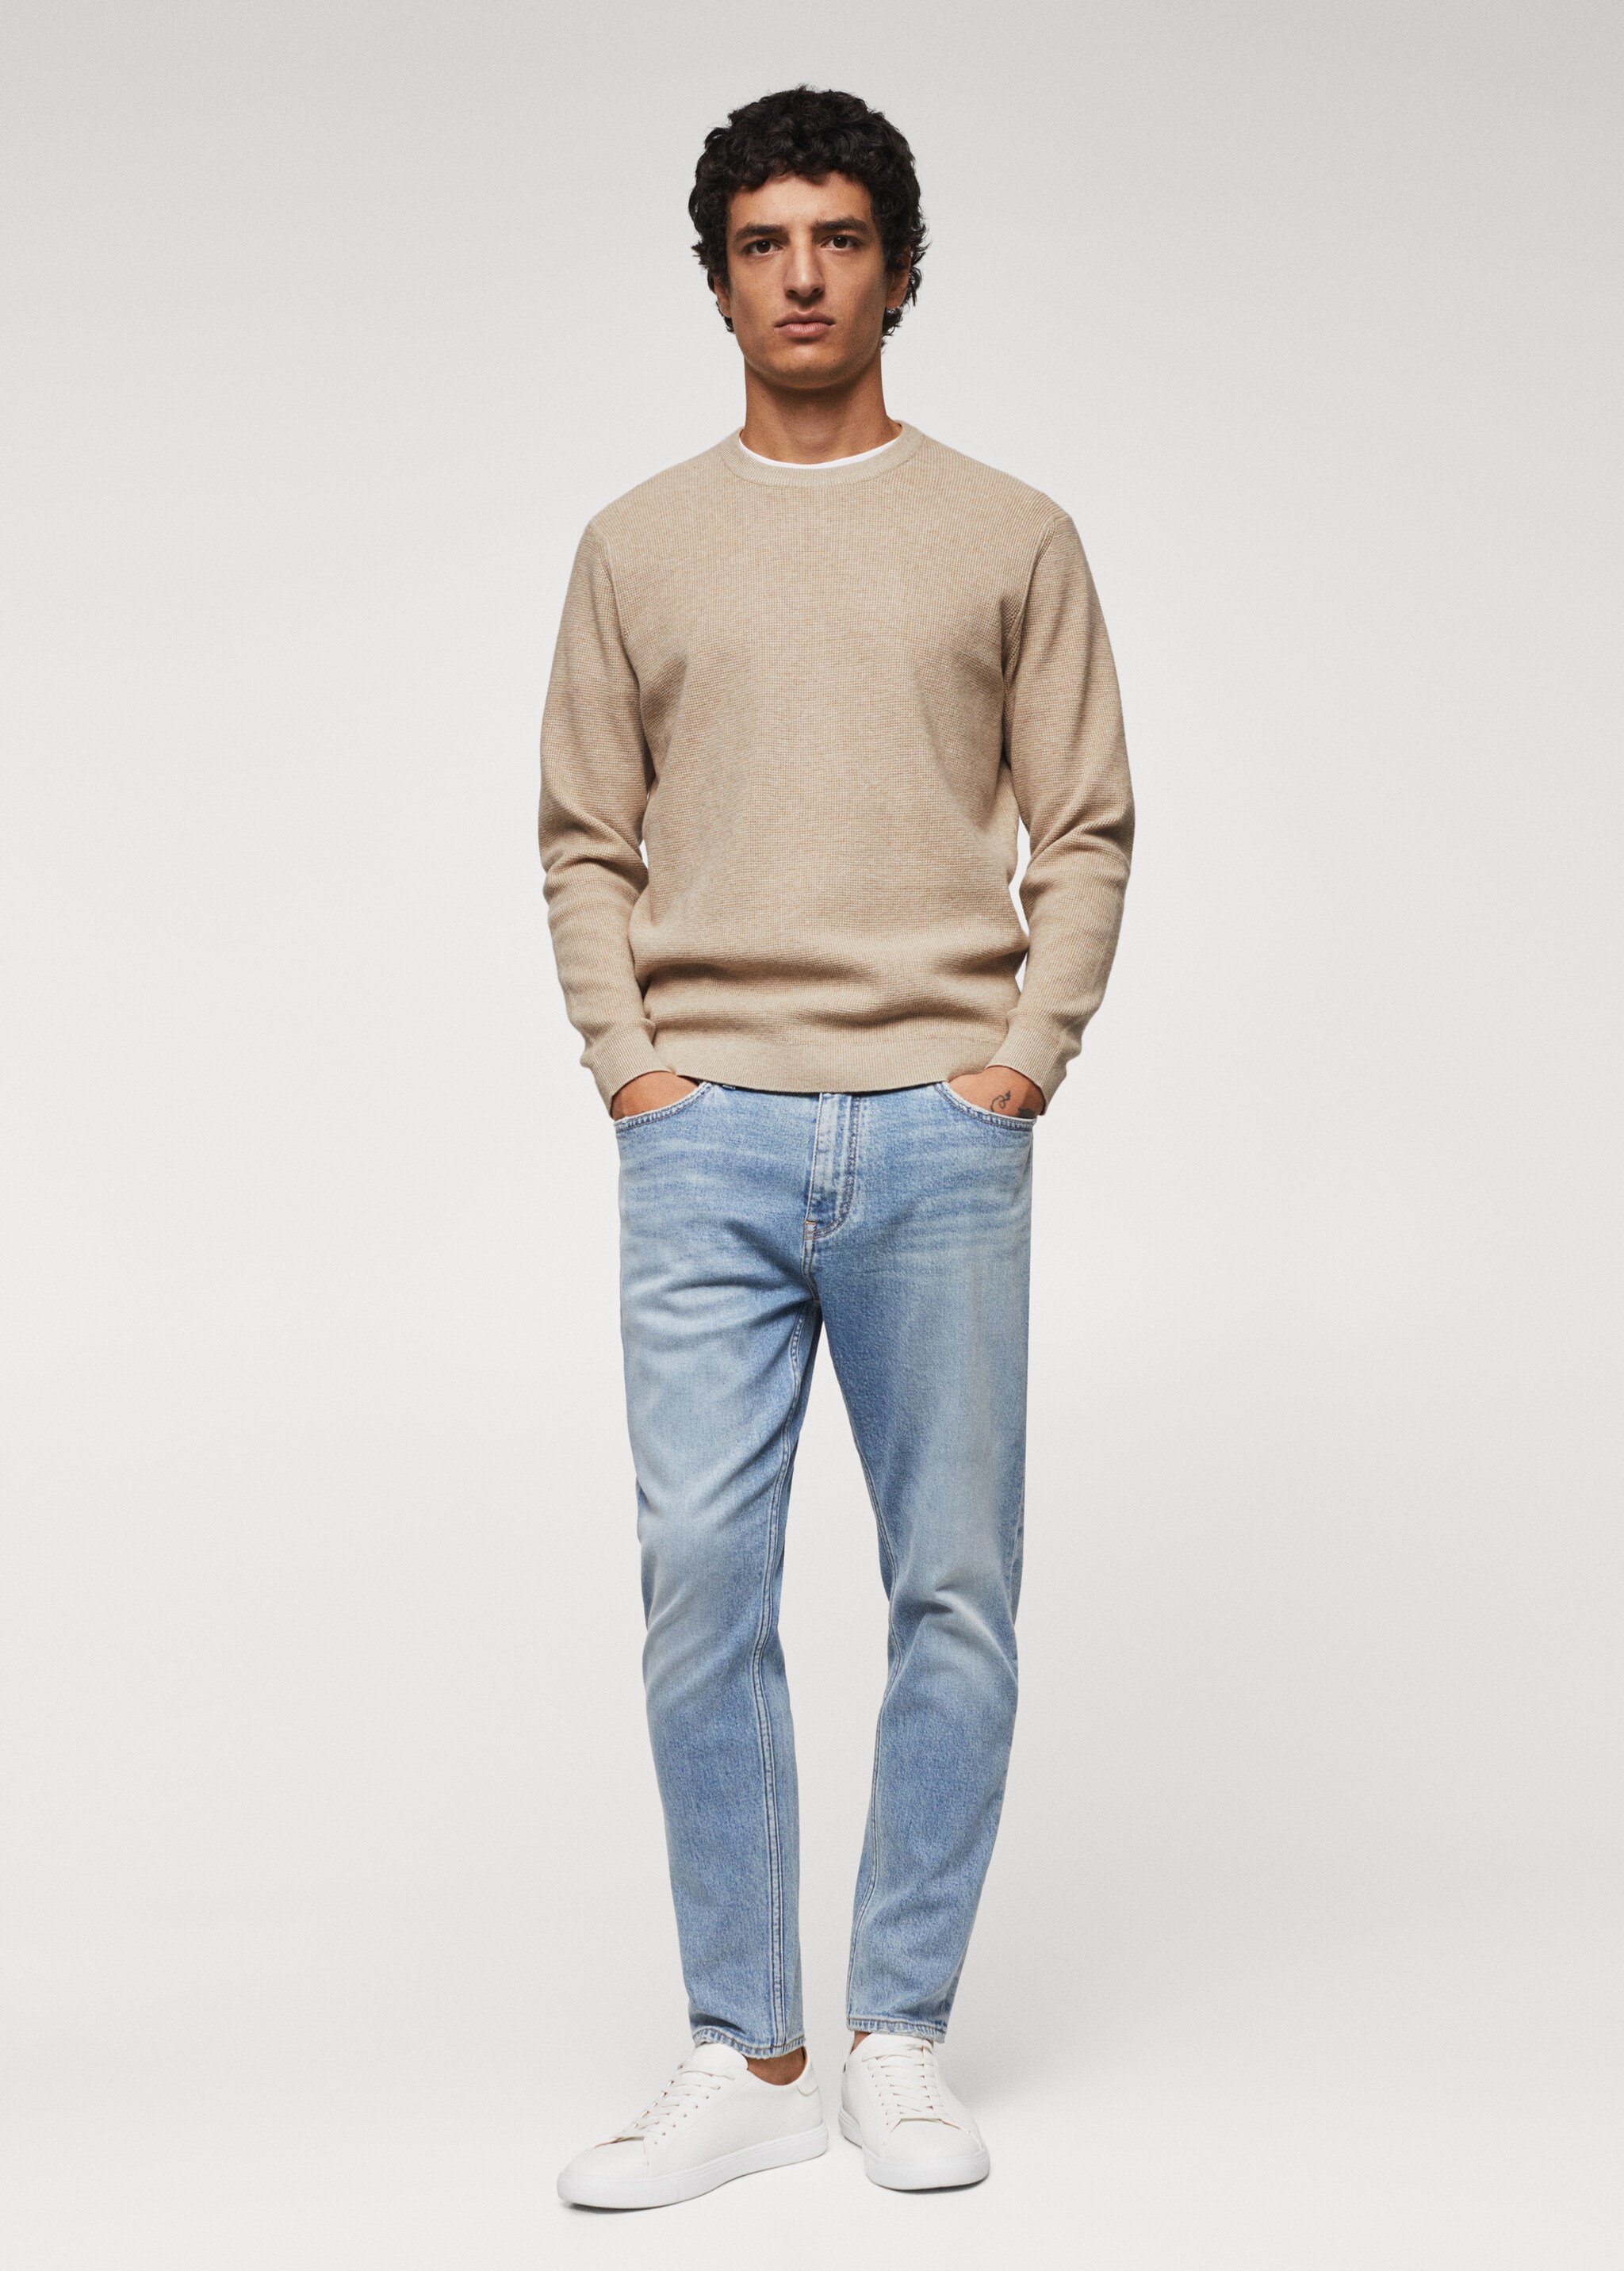 Structured cotton sweater - General plane